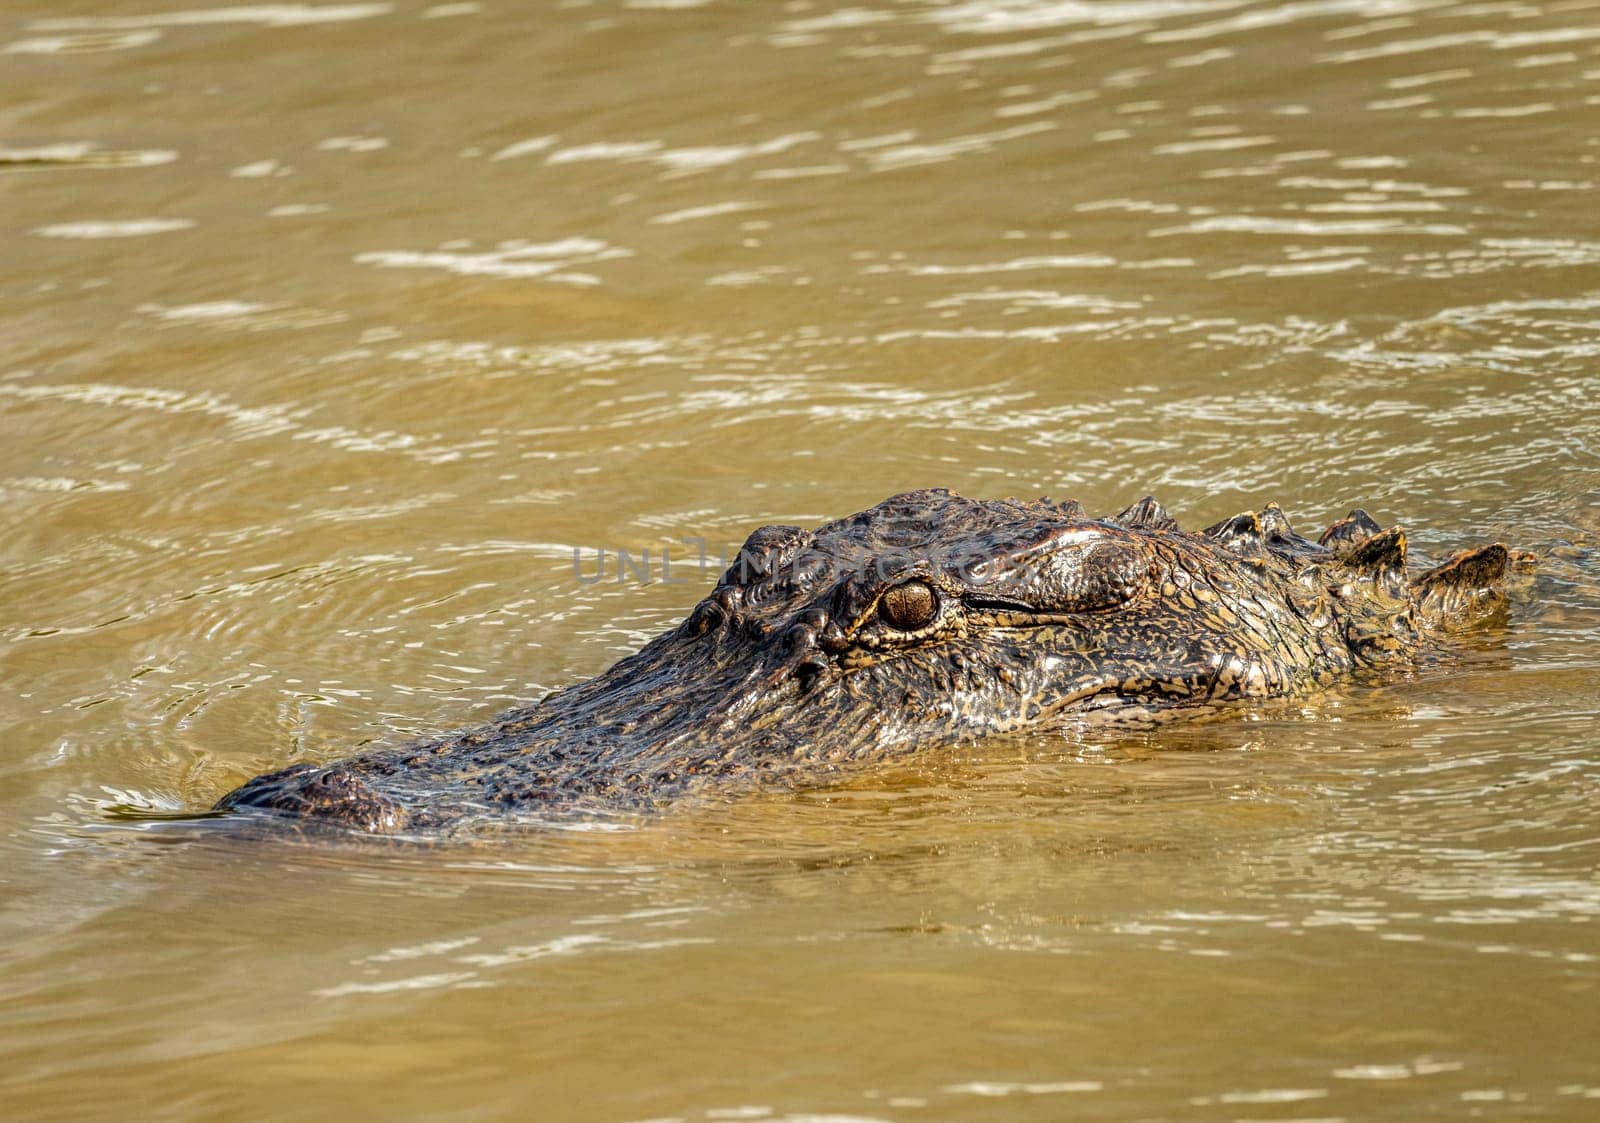 Head and eyes of American alligator in the calm waters of Atchafalaya basin by steheap